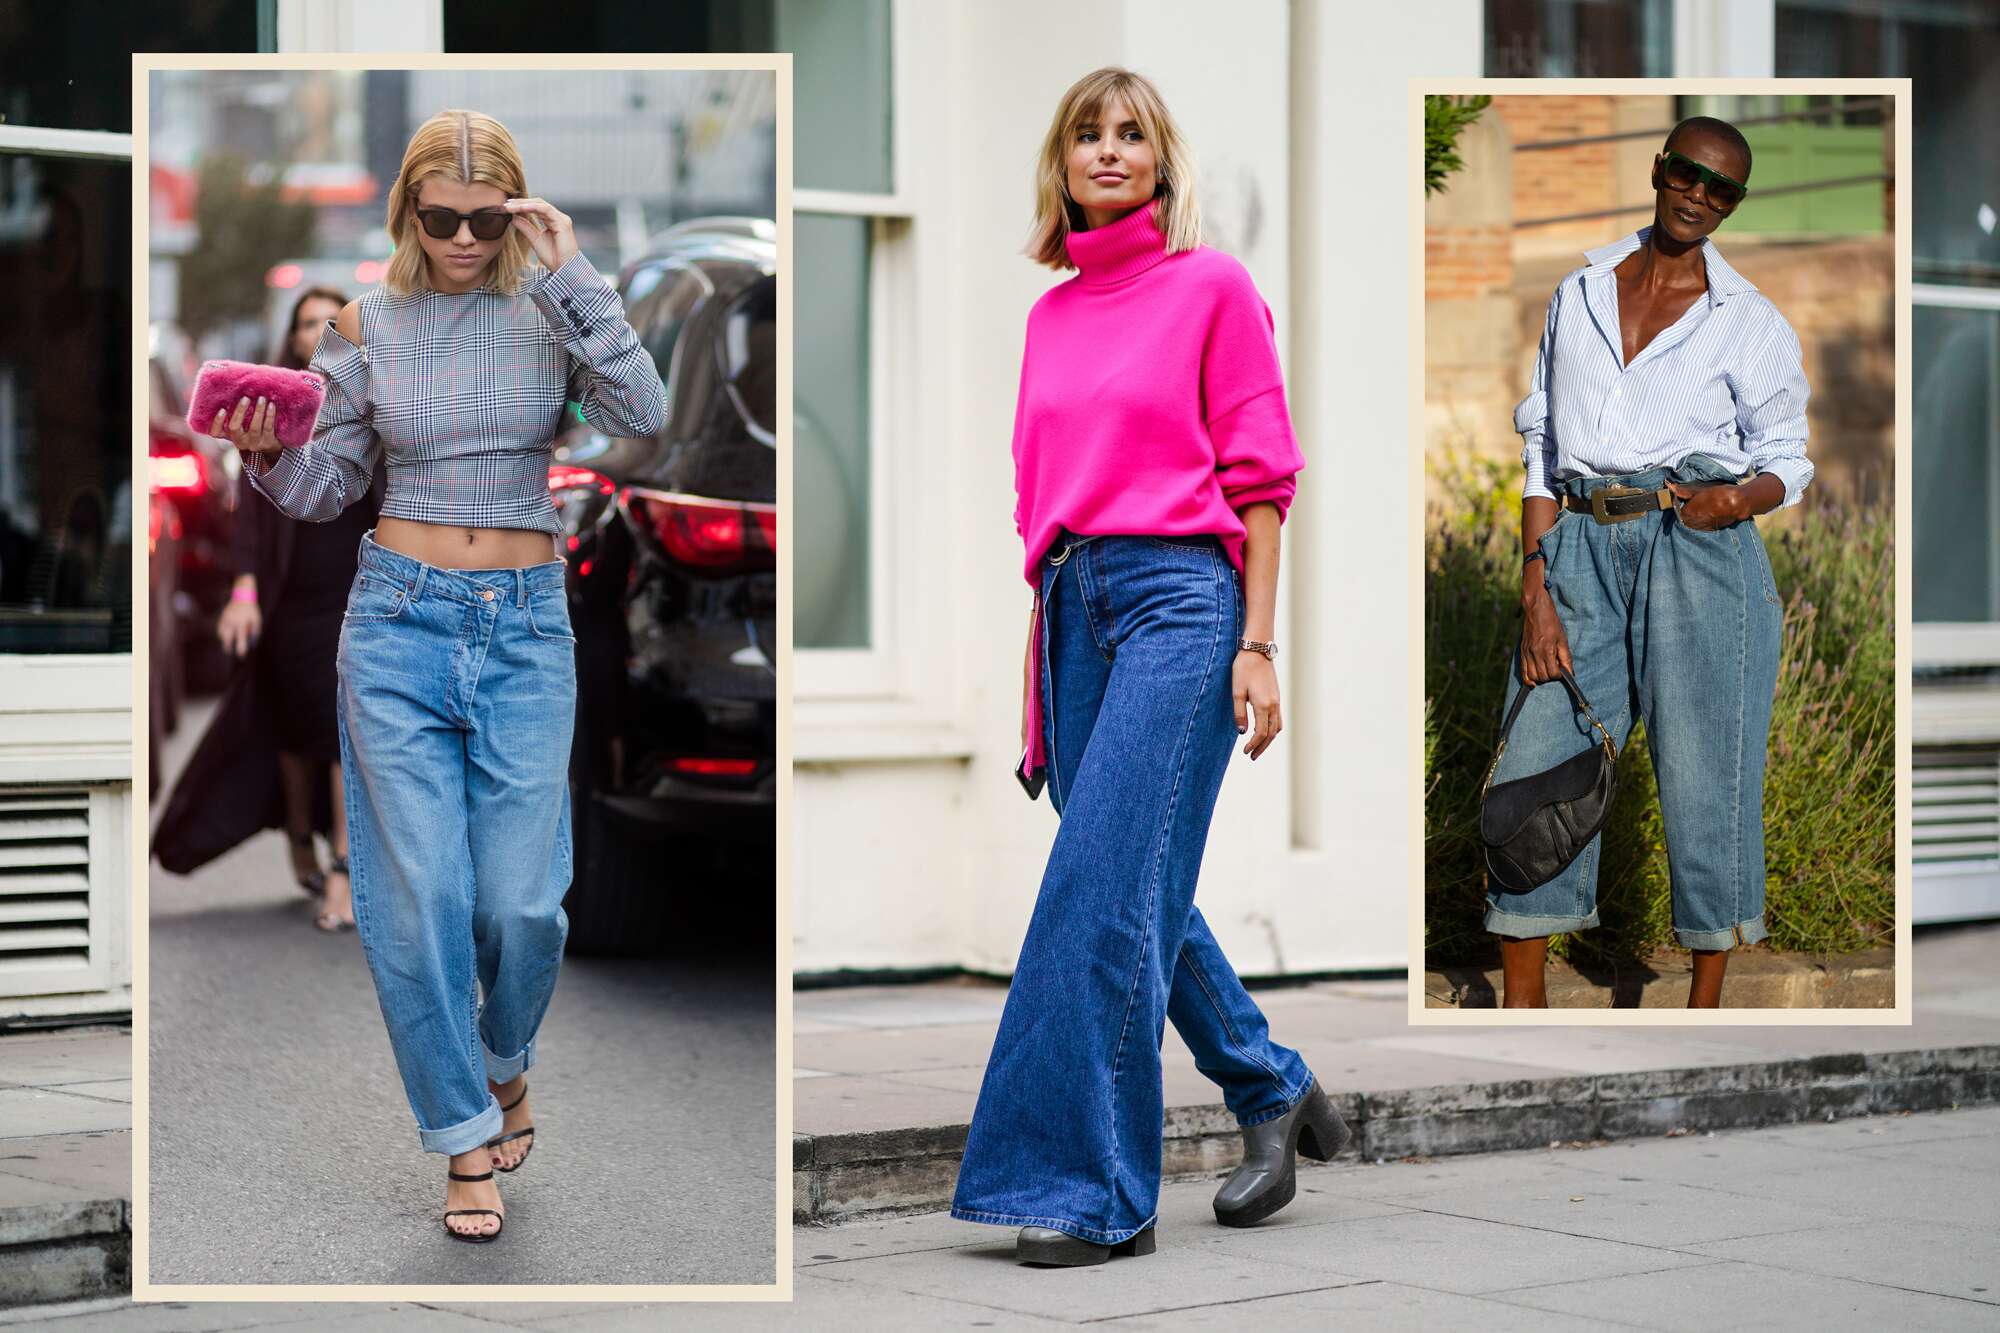 Baggy jeans are not out of fashion yet